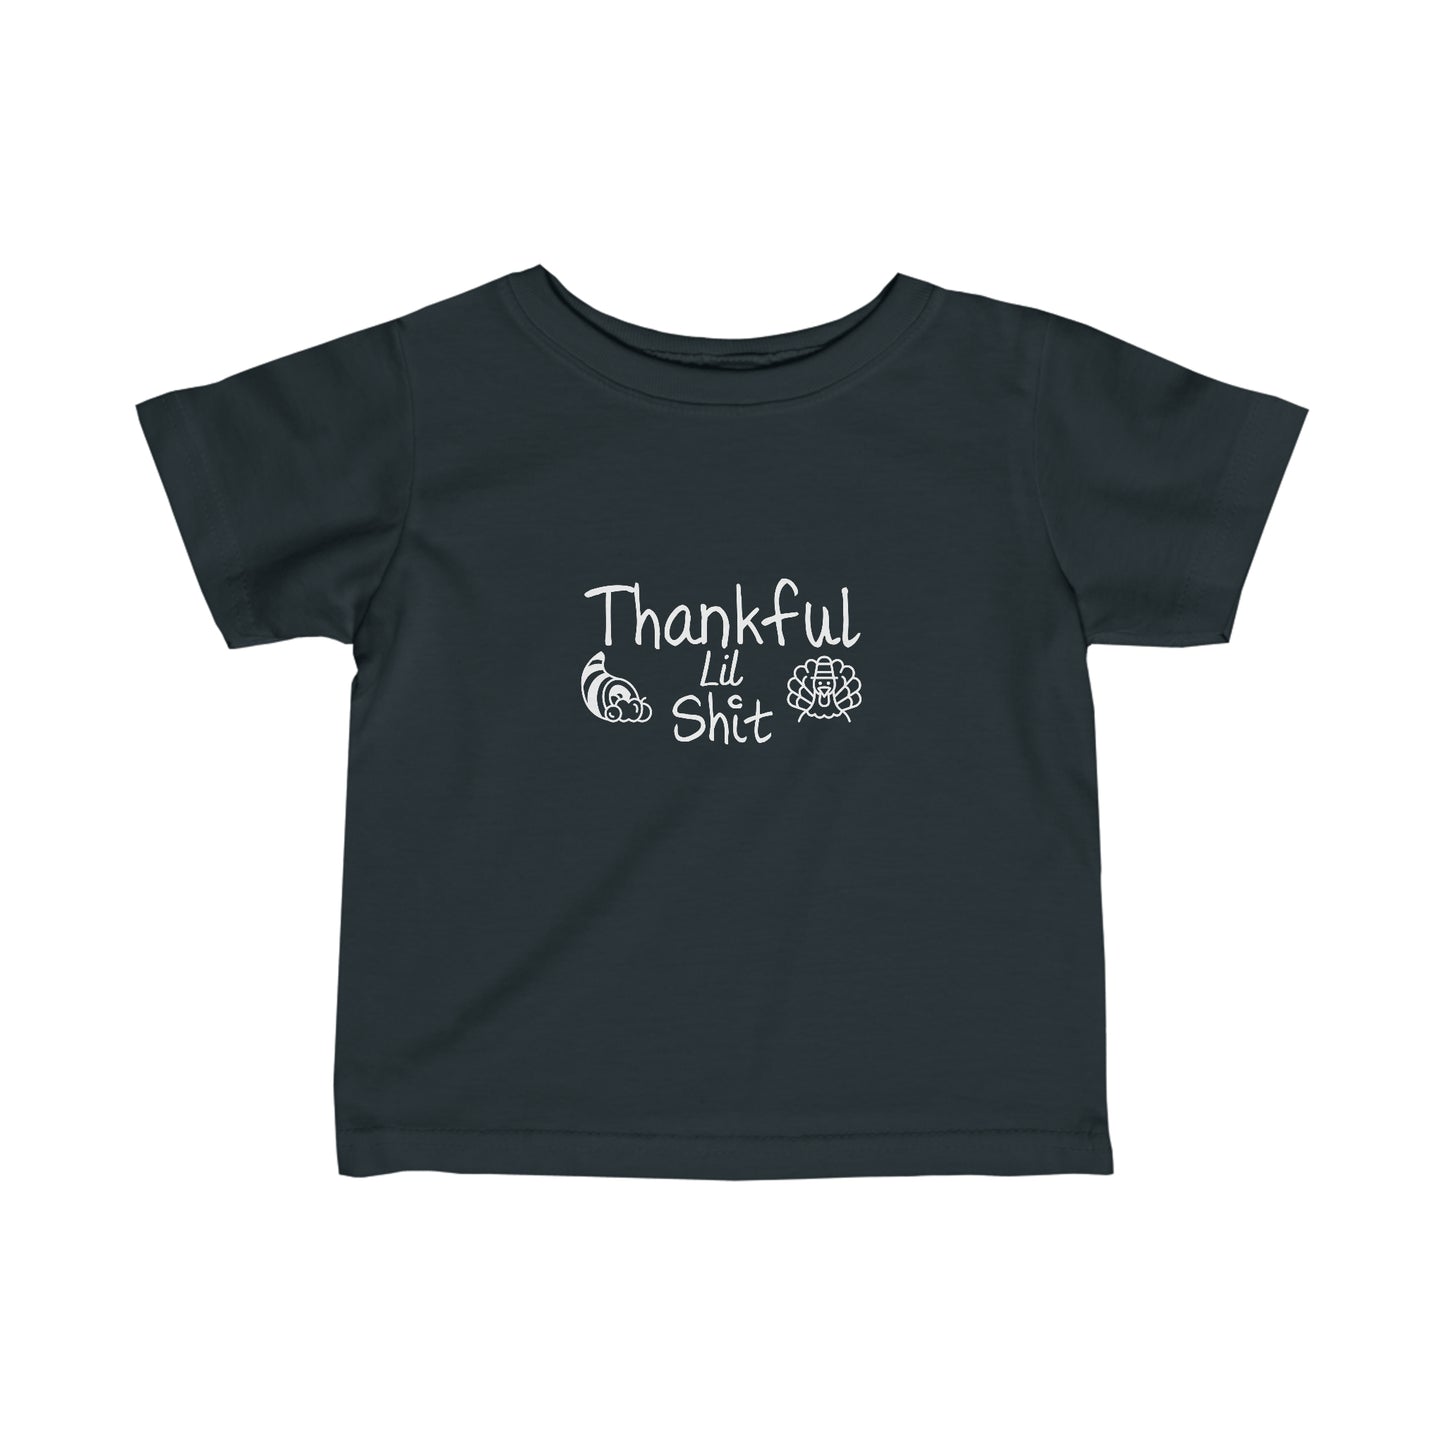 Infant Holiday Tee, Toddler Holiday T-Shirt, Thanksgiving Shirt for Toddlers, 6-24M